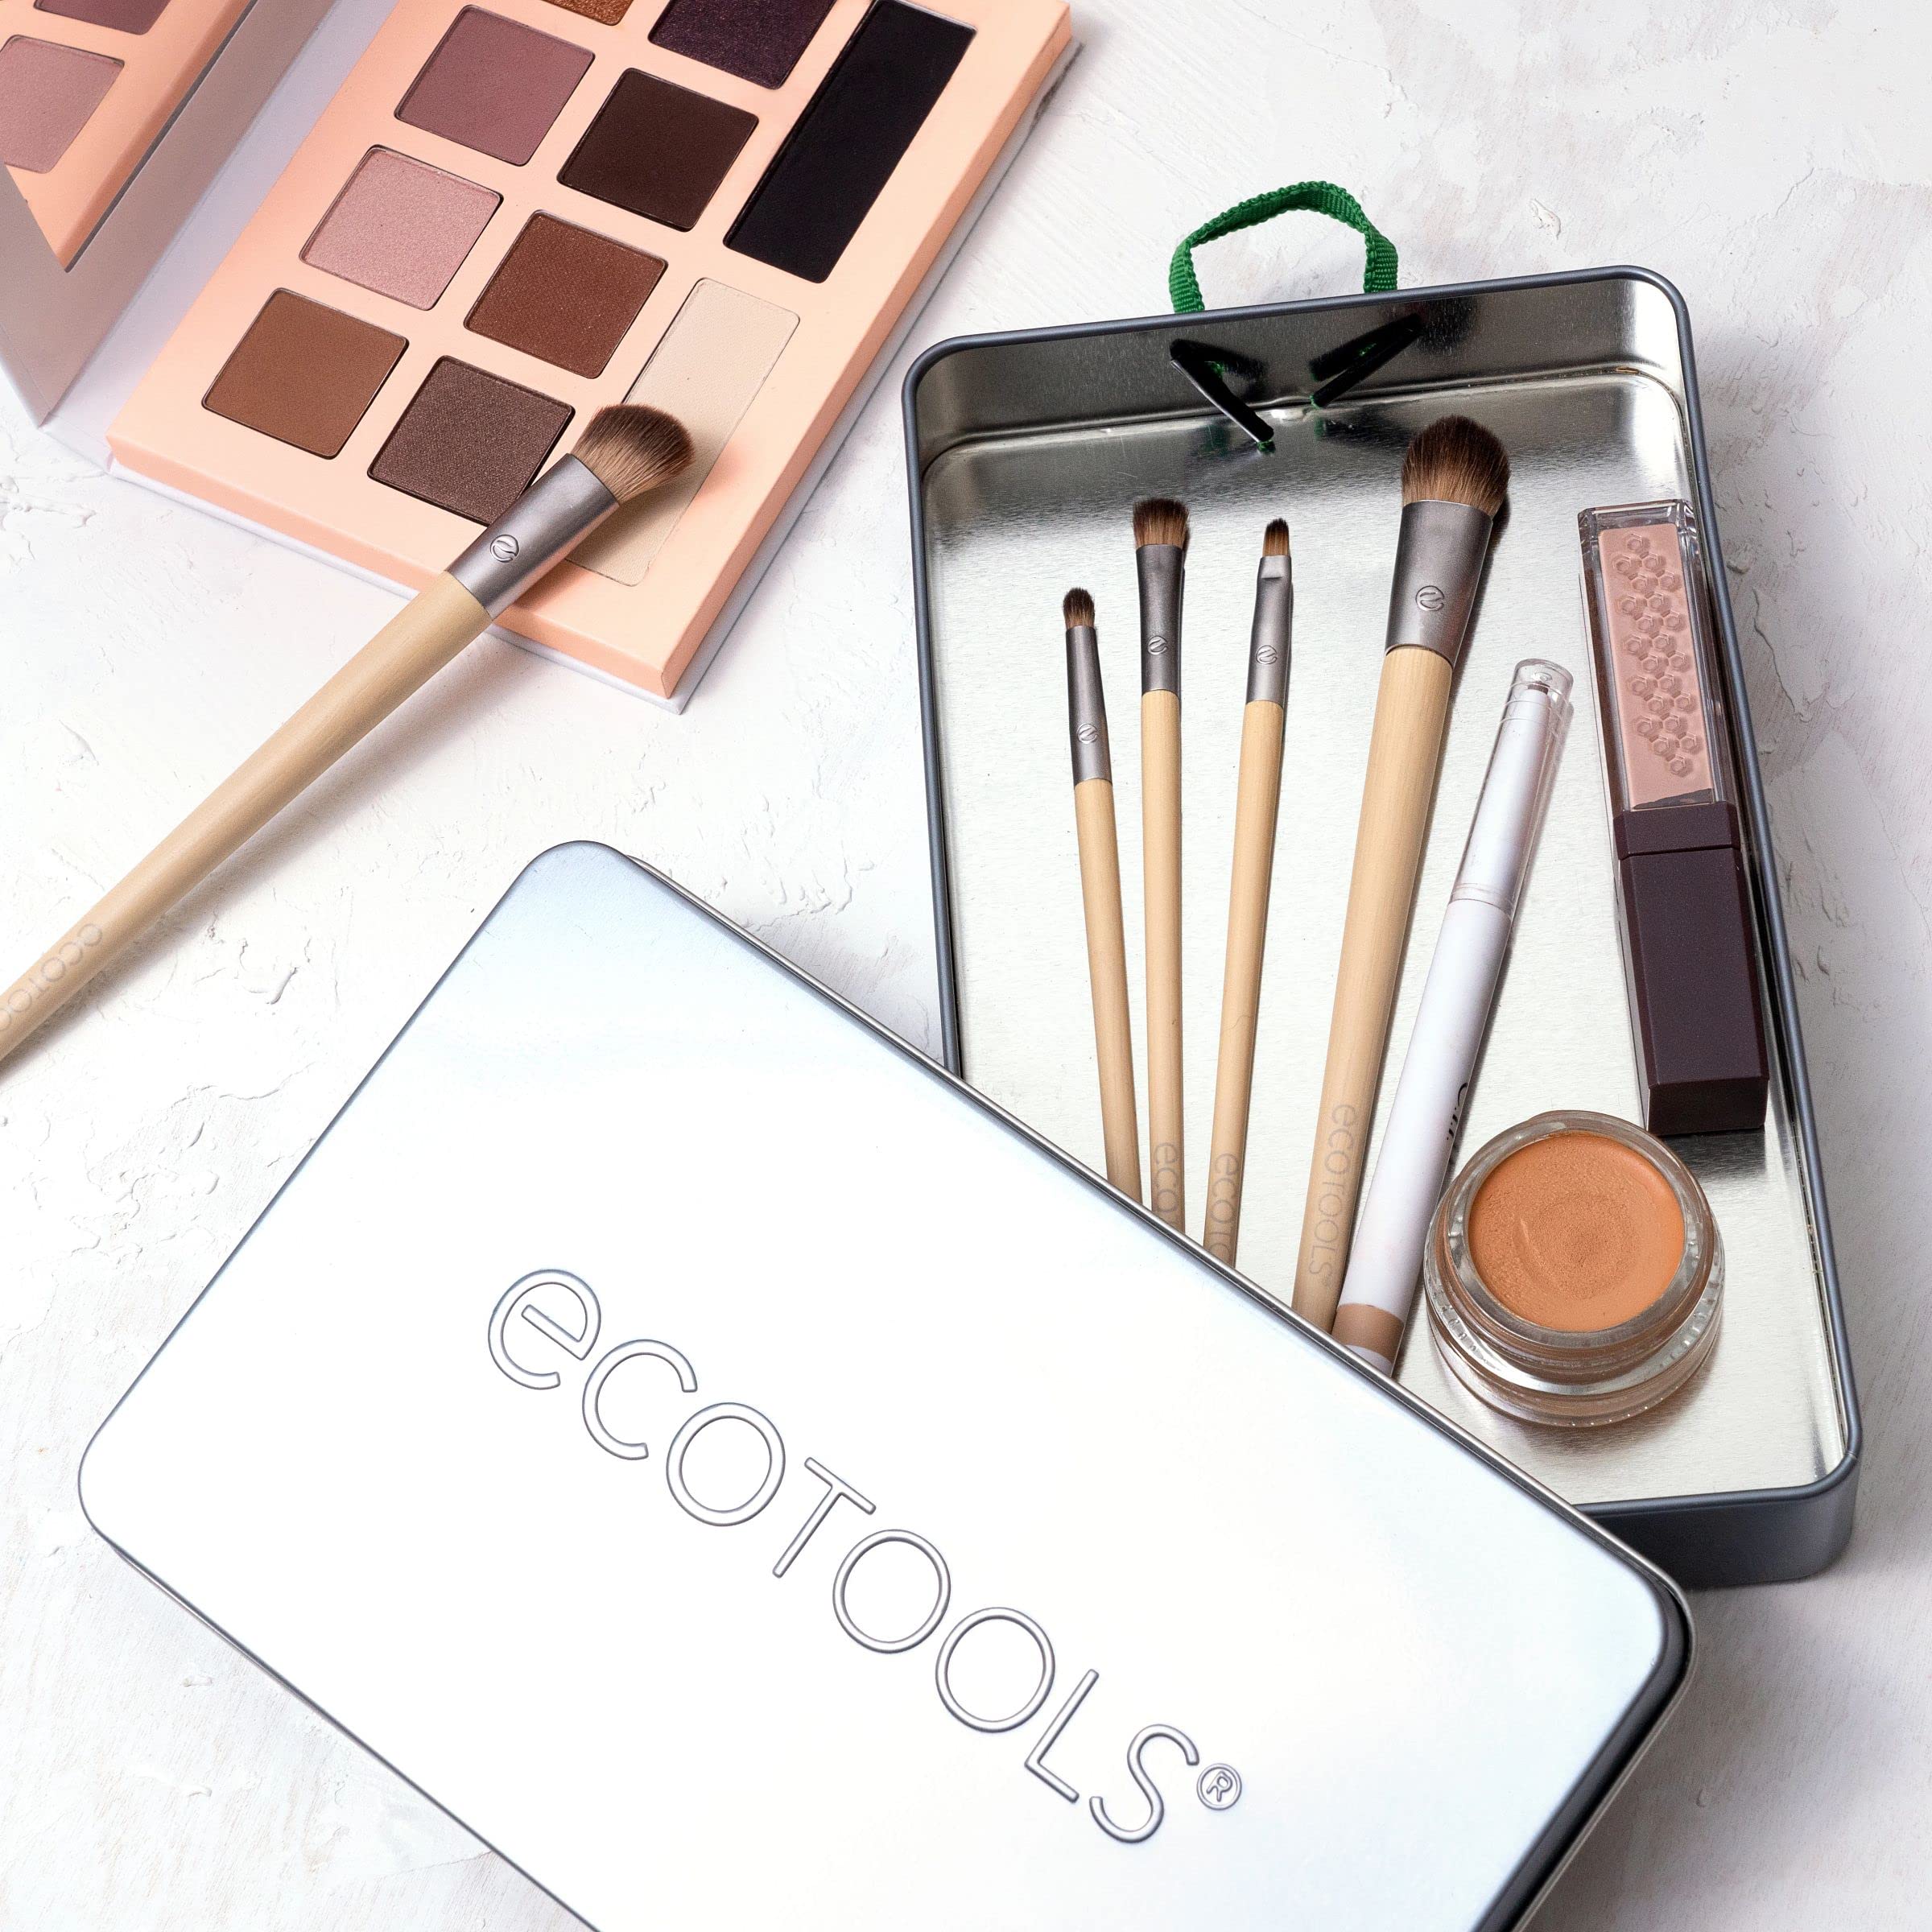 EcoTools Daily Defined Eye Makeup Brush Kit, Travel Friendly, Versatile Eye Makeup Looks, Convenient Makeup Tools On-The-Go, For Eyeshadow & Eye Liner, Eco-Friendly Makeup Brushes, 6 Piece Set